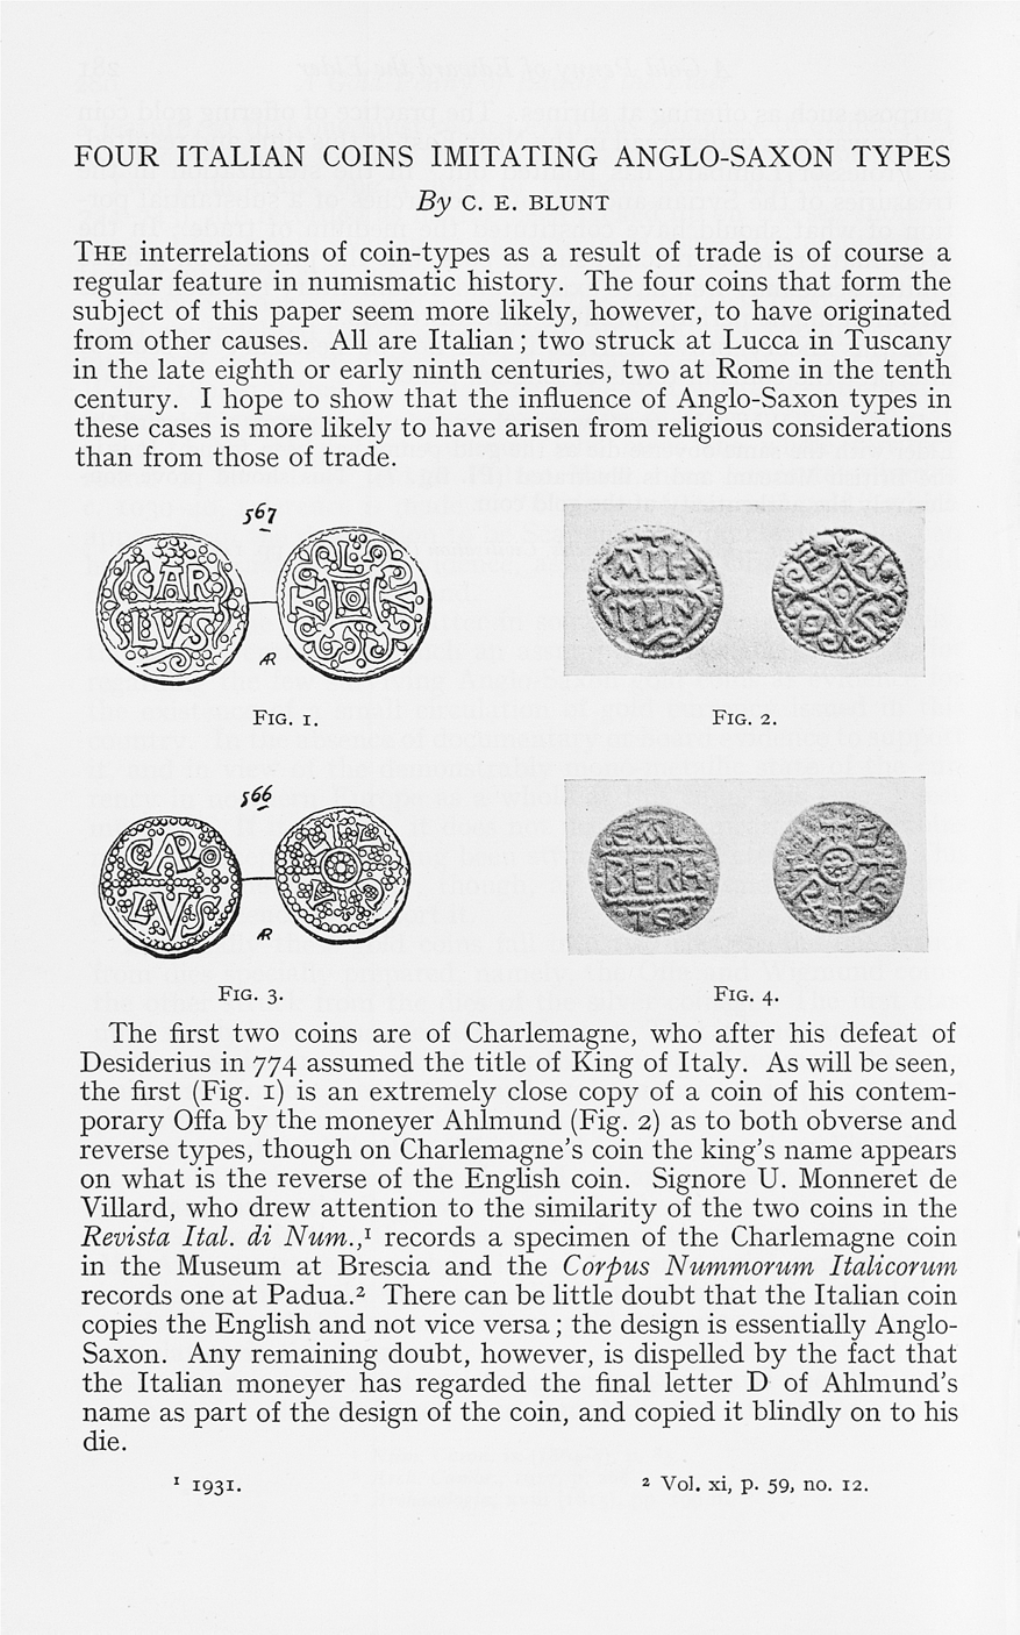 FOUR ITALIAN COINS IMITATING ANGLO-SAXON TYPES the Interrelations of Coin-Types As a Result of Trade Is of Course a Regular Feat